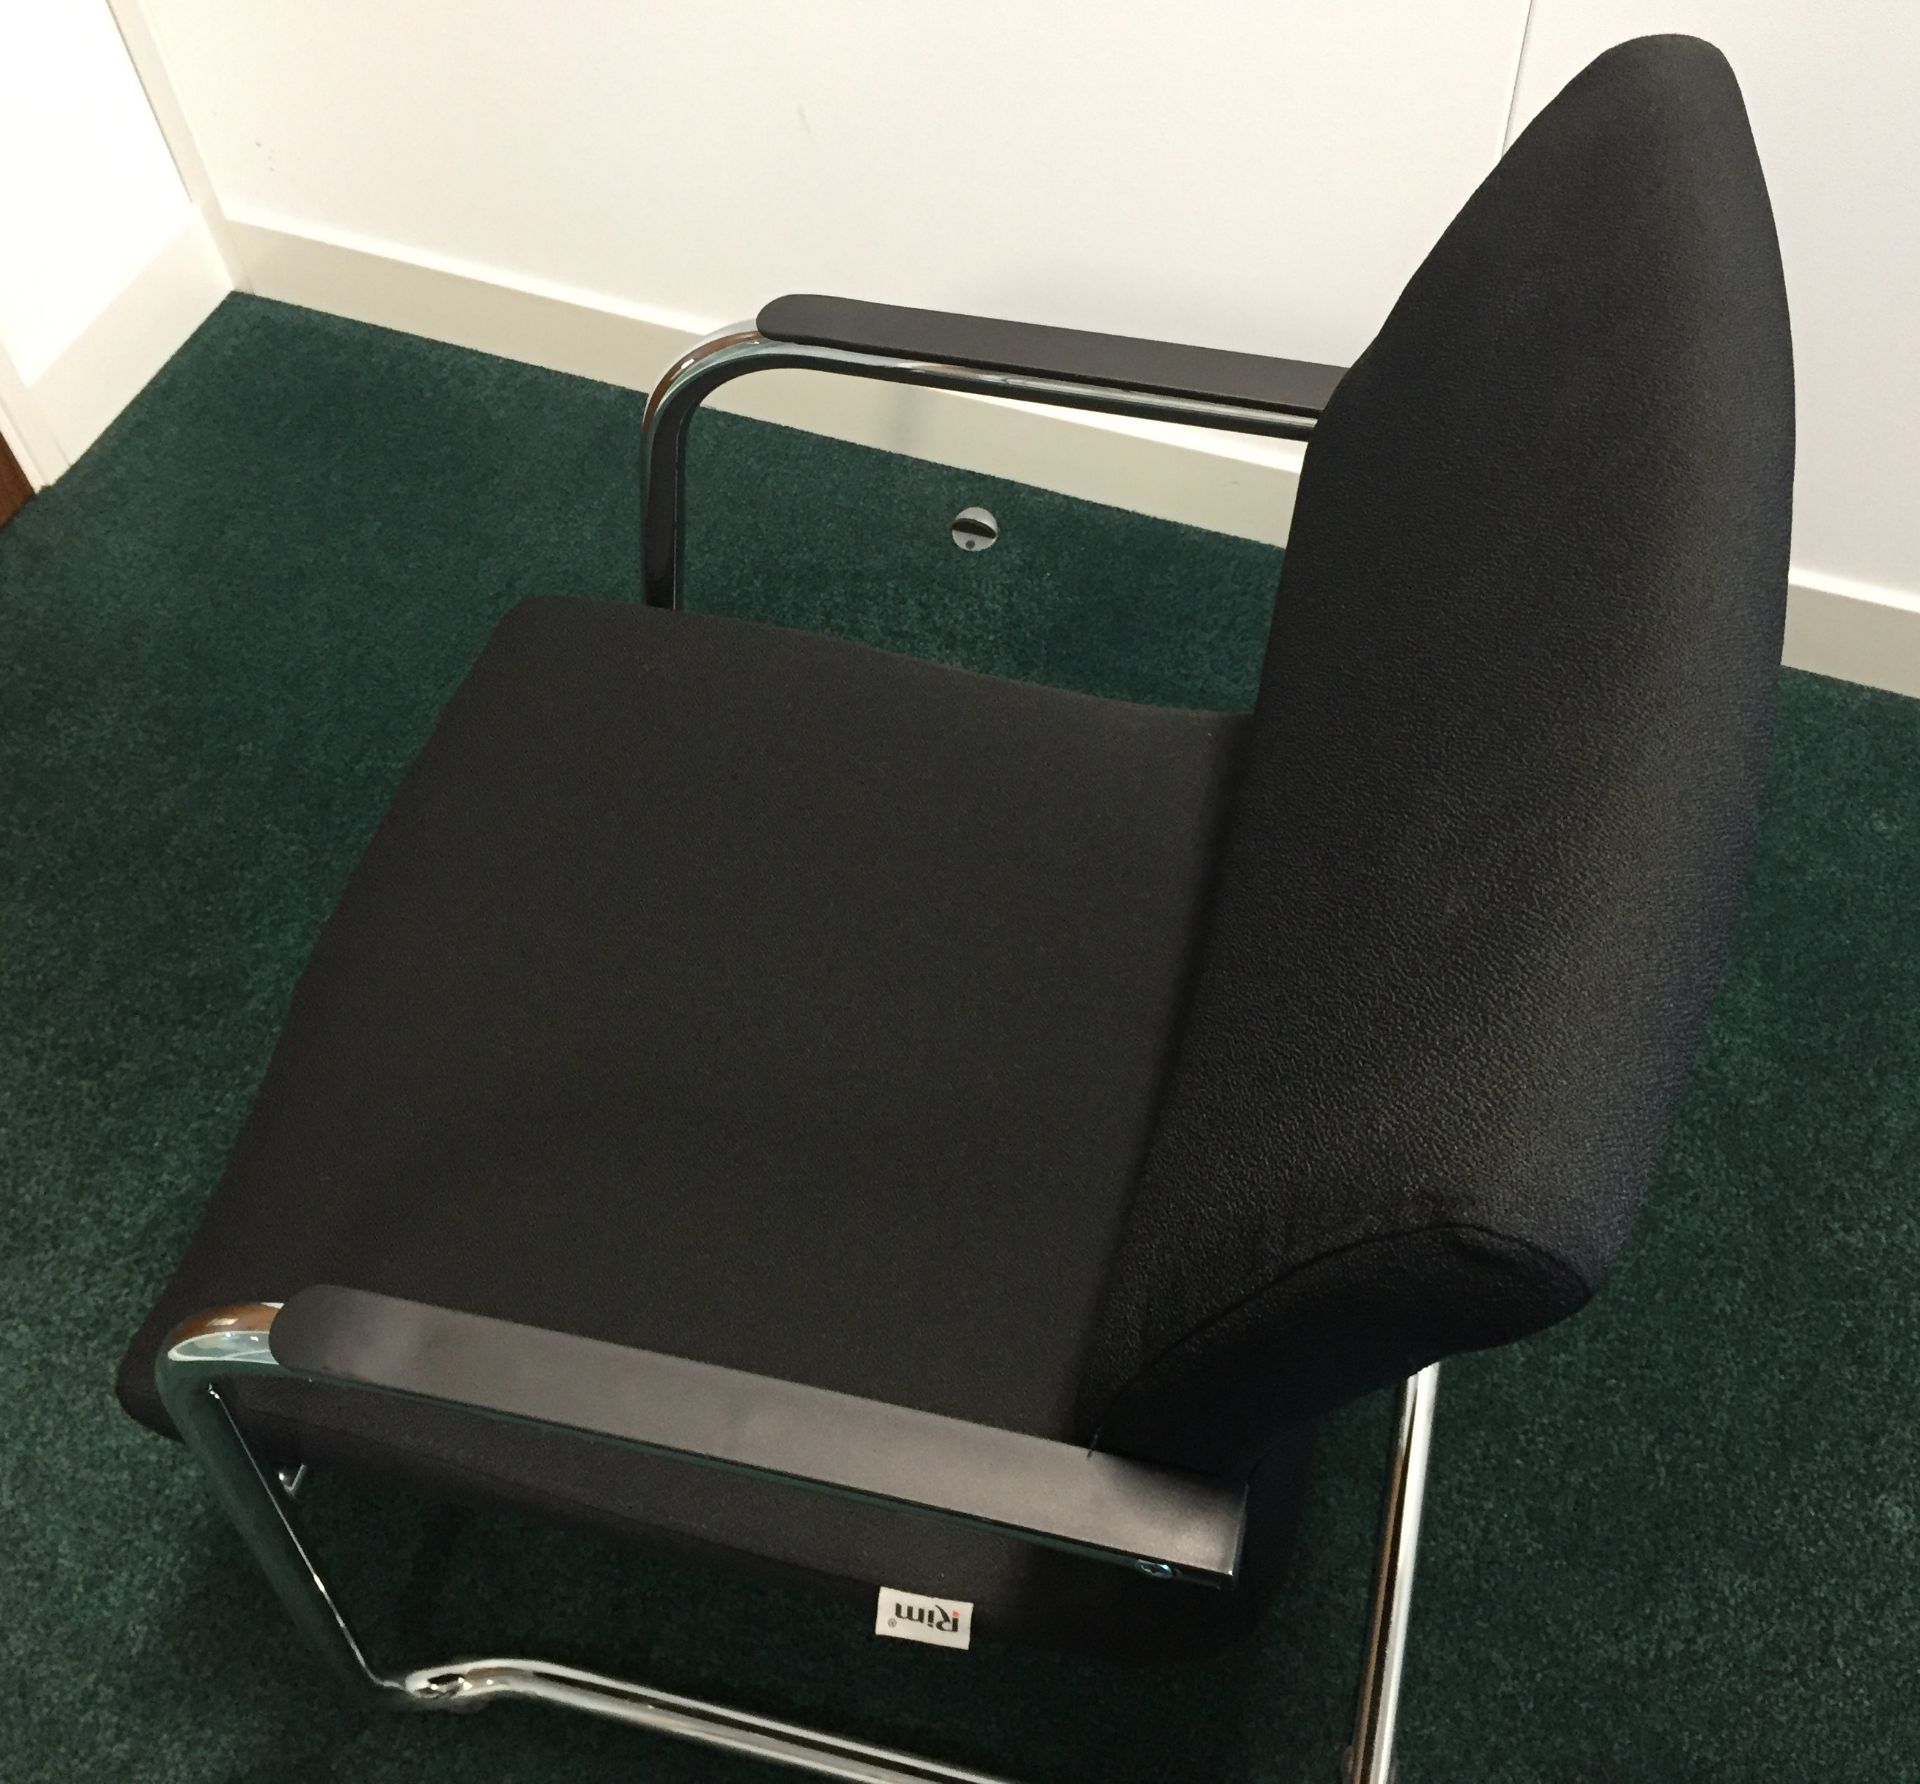 1 x Designer RIM Office Chair - Suitable For Desk Use, Meeting Tables or Conference Rooms - Features - Image 4 of 6